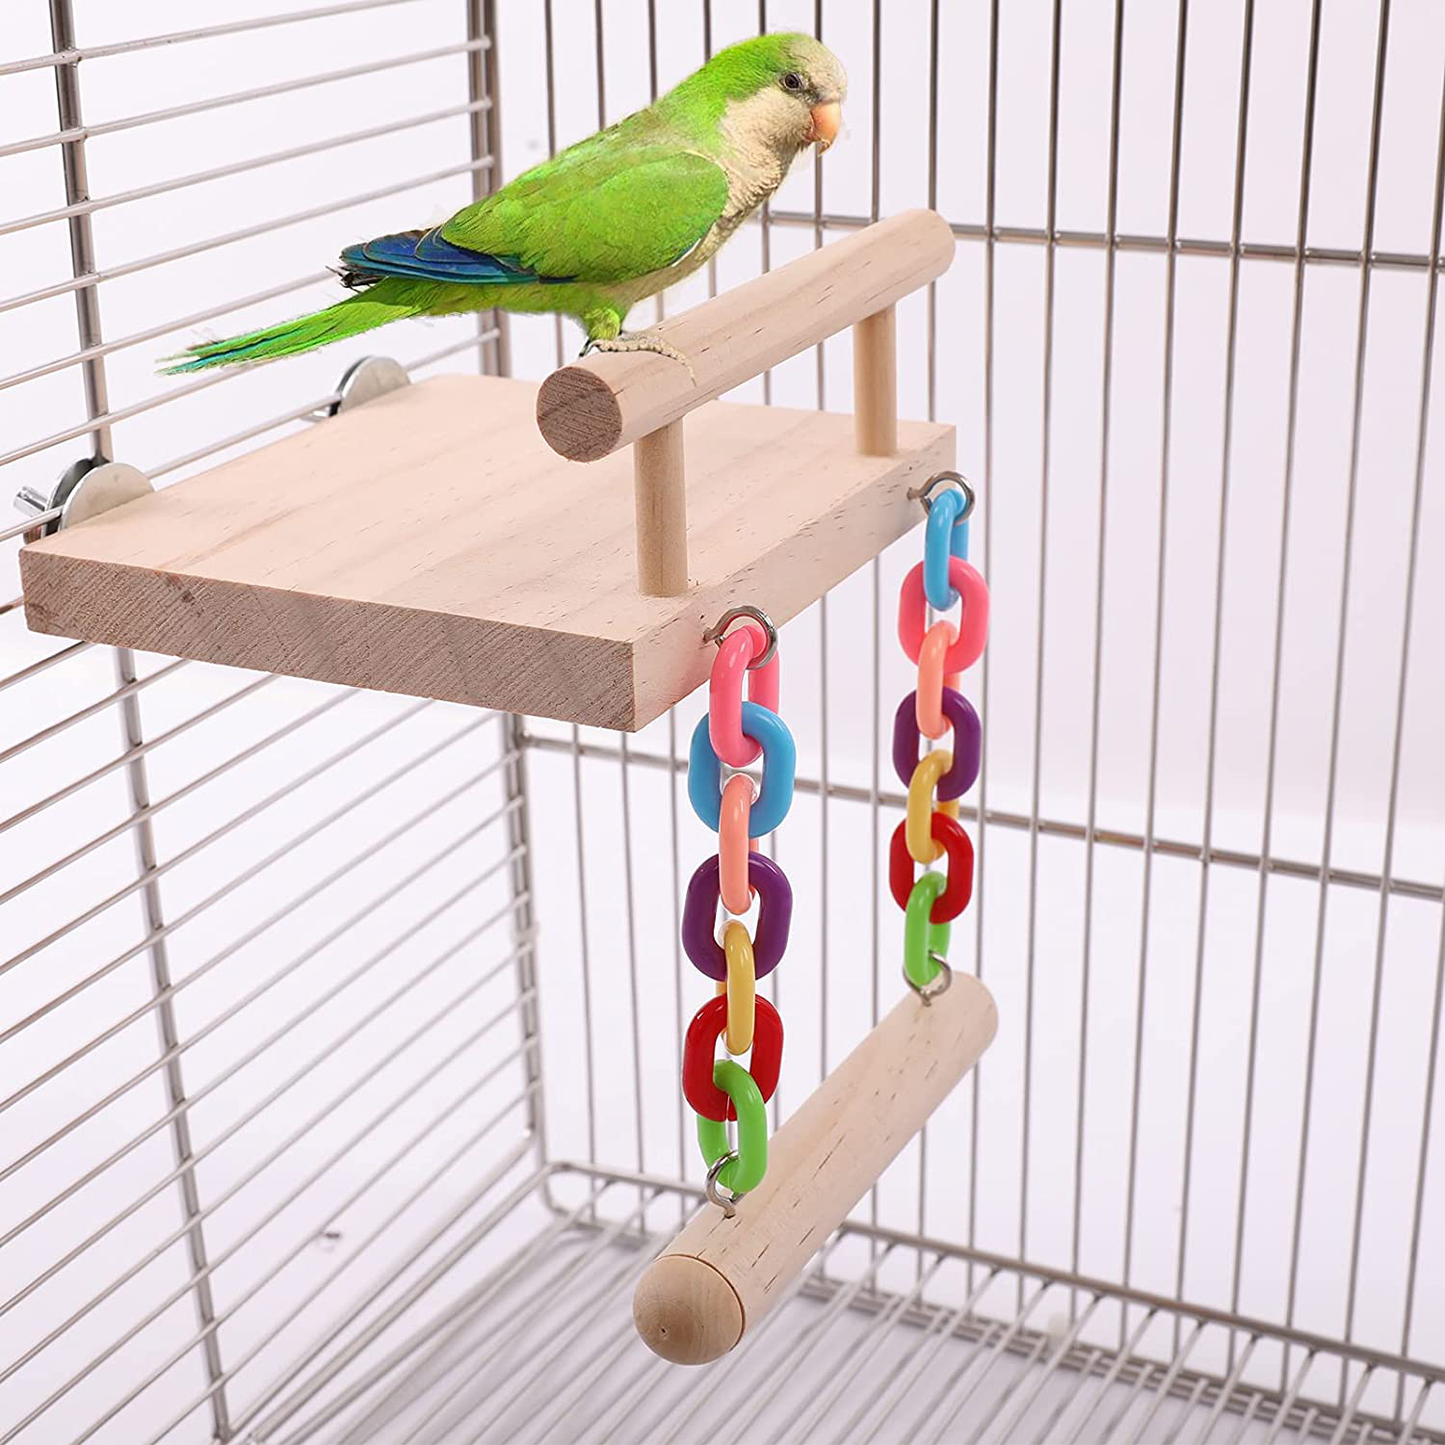 Bird Perches Cage Toys, Bird Wooden Play Gyms Stands with Acrylic Wood Swing, Rattan Ball, Ferris Wheel, Bird Perch Chewing Toys for Green Cheeks, Baby Lovebird, Chinchilla, Hamster